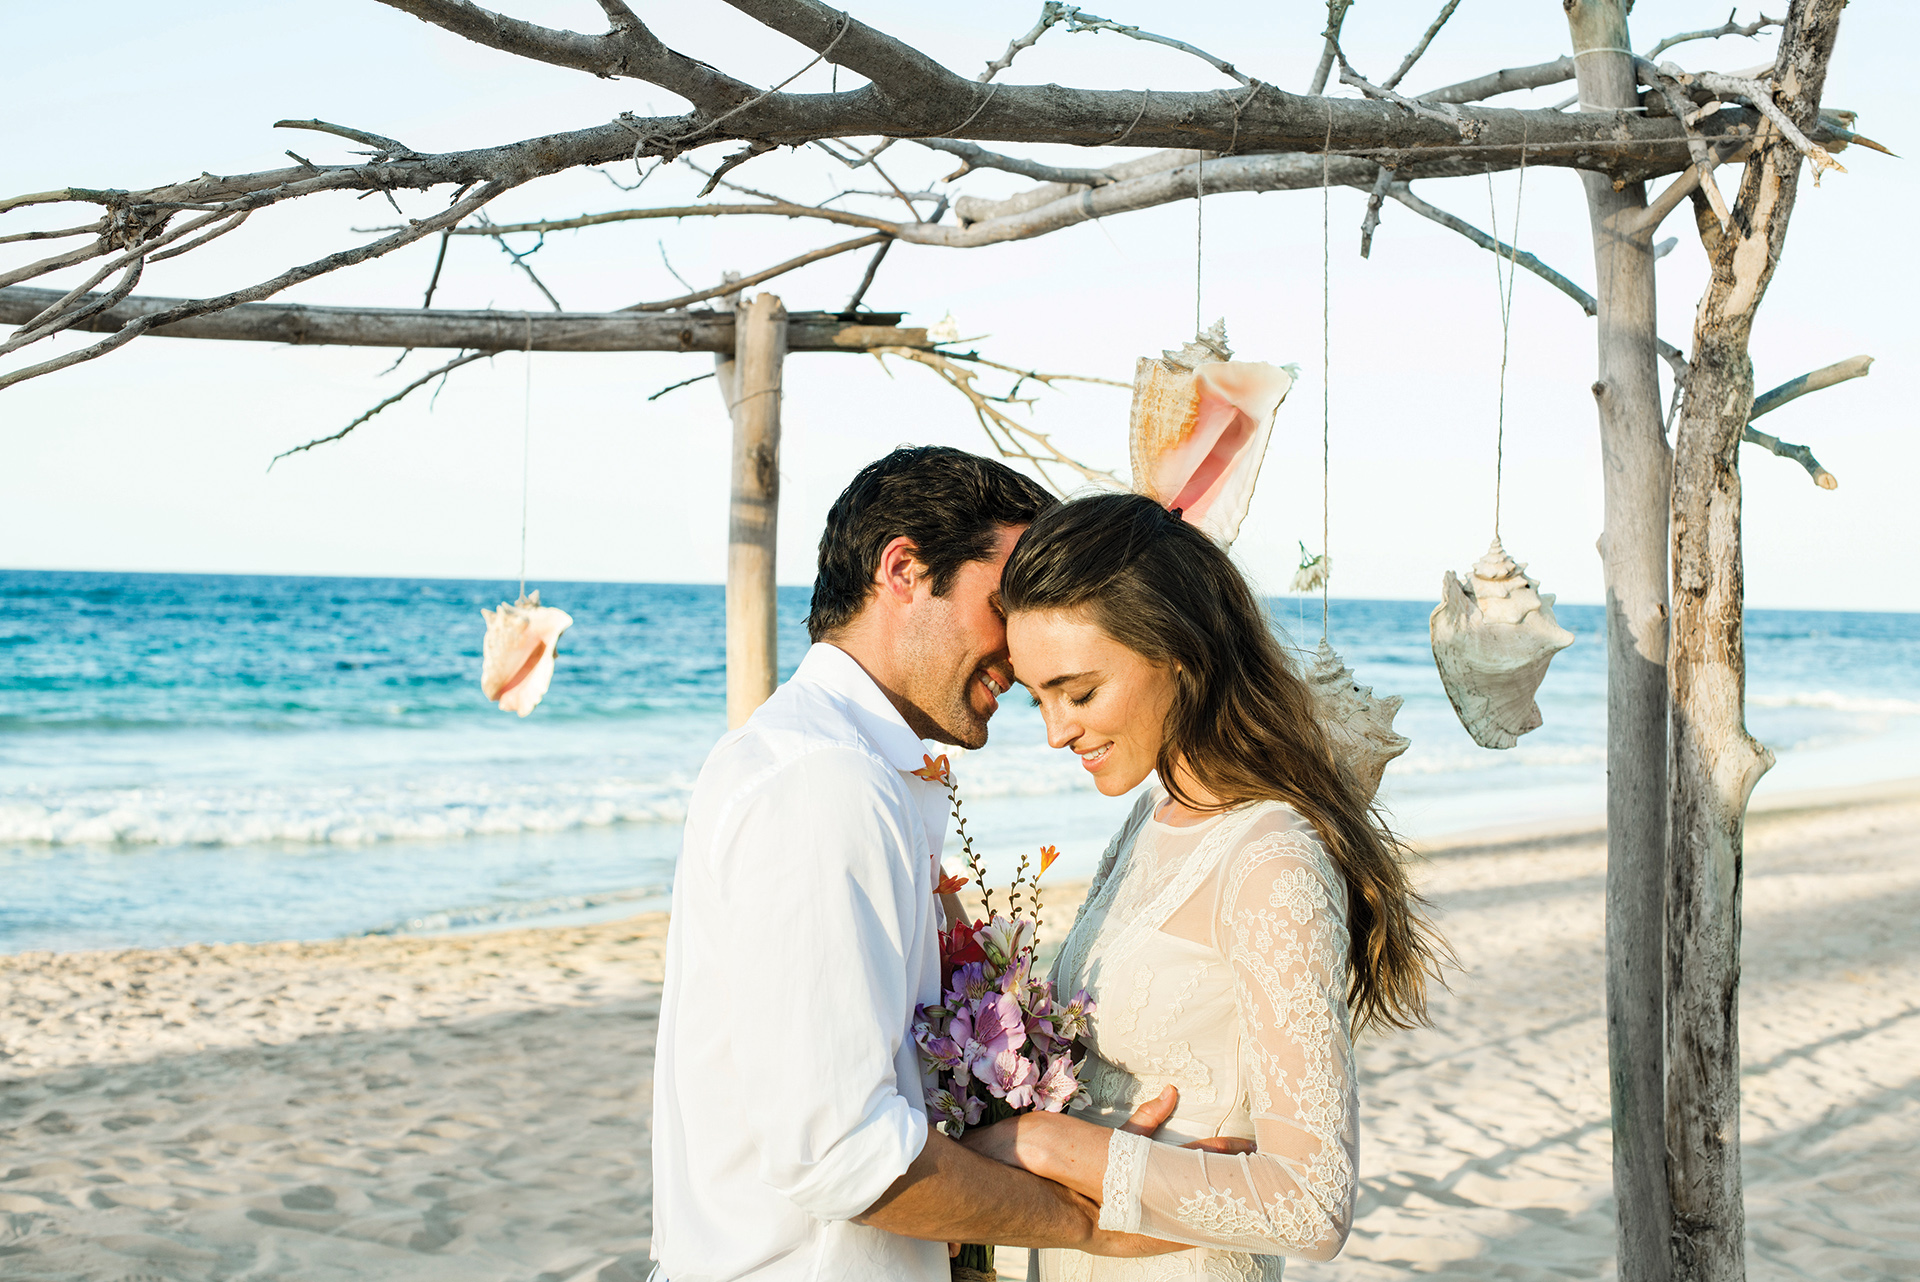 Natural wedding style by the beach in Punta Cana